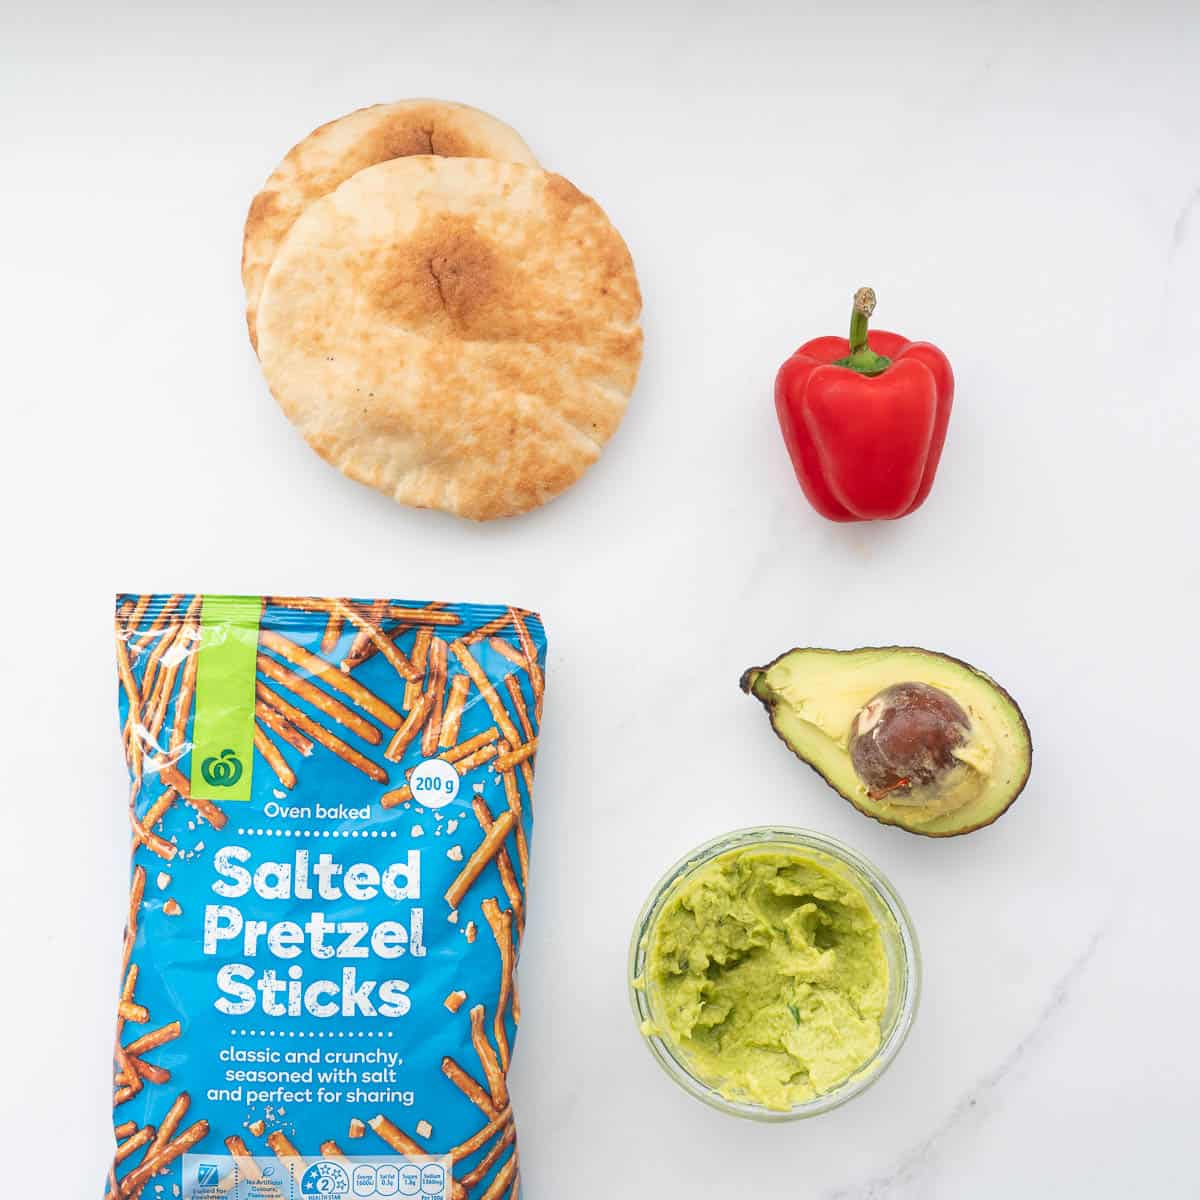 Two pita breads, a bag of pretzel sticks, a red capsiucm and half an avocado lying on a marble bench top.